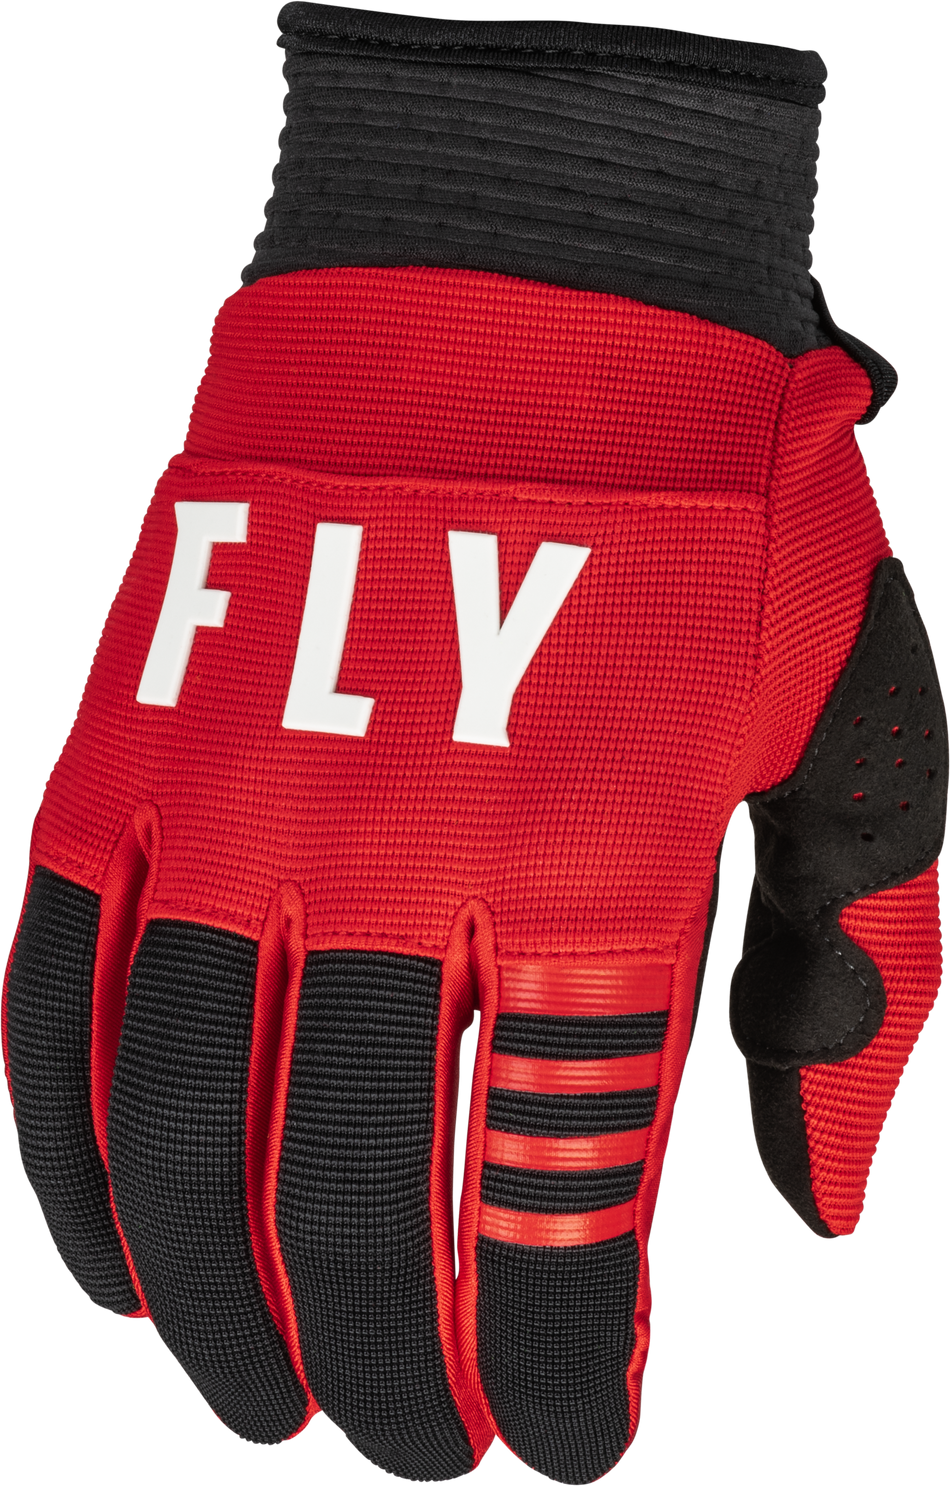 FLY RACING F-16 Gloves Red/Black Lg 376-914L